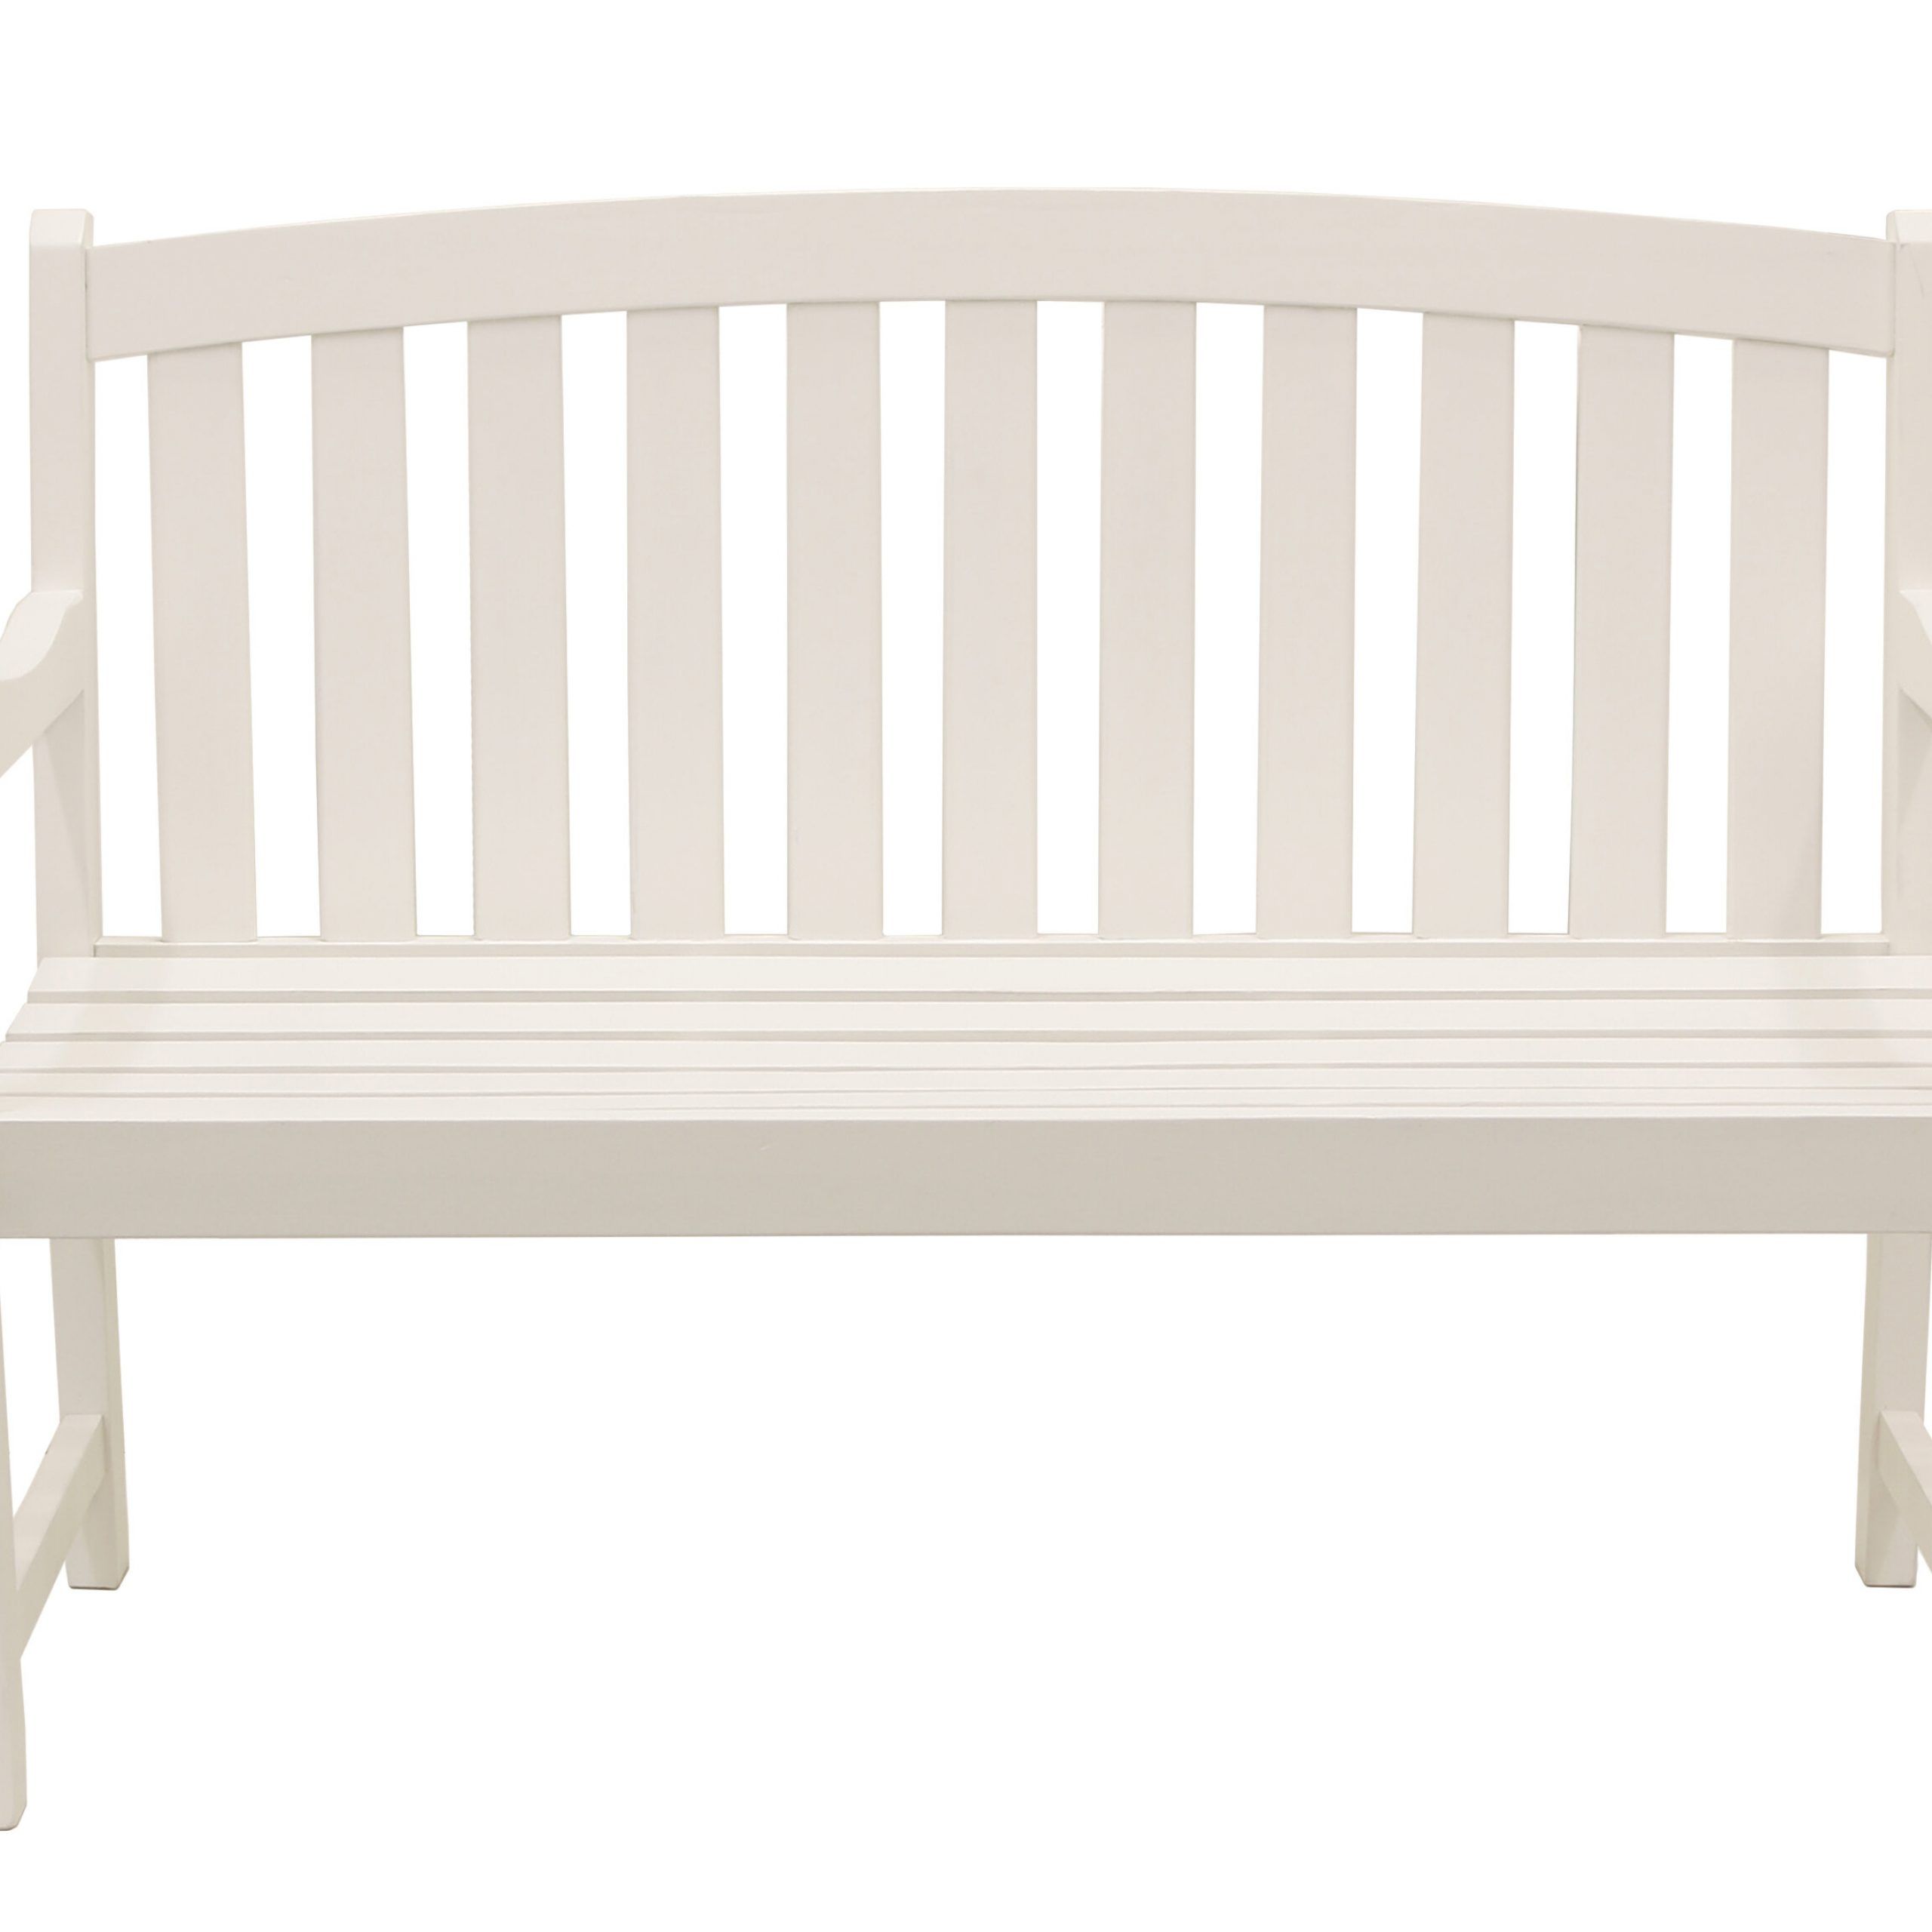 Outdoor Benches You'Ll Love In 2020 | Wayfair Within Aranita Tree Of Life Iron Garden Benches (View 17 of 25)